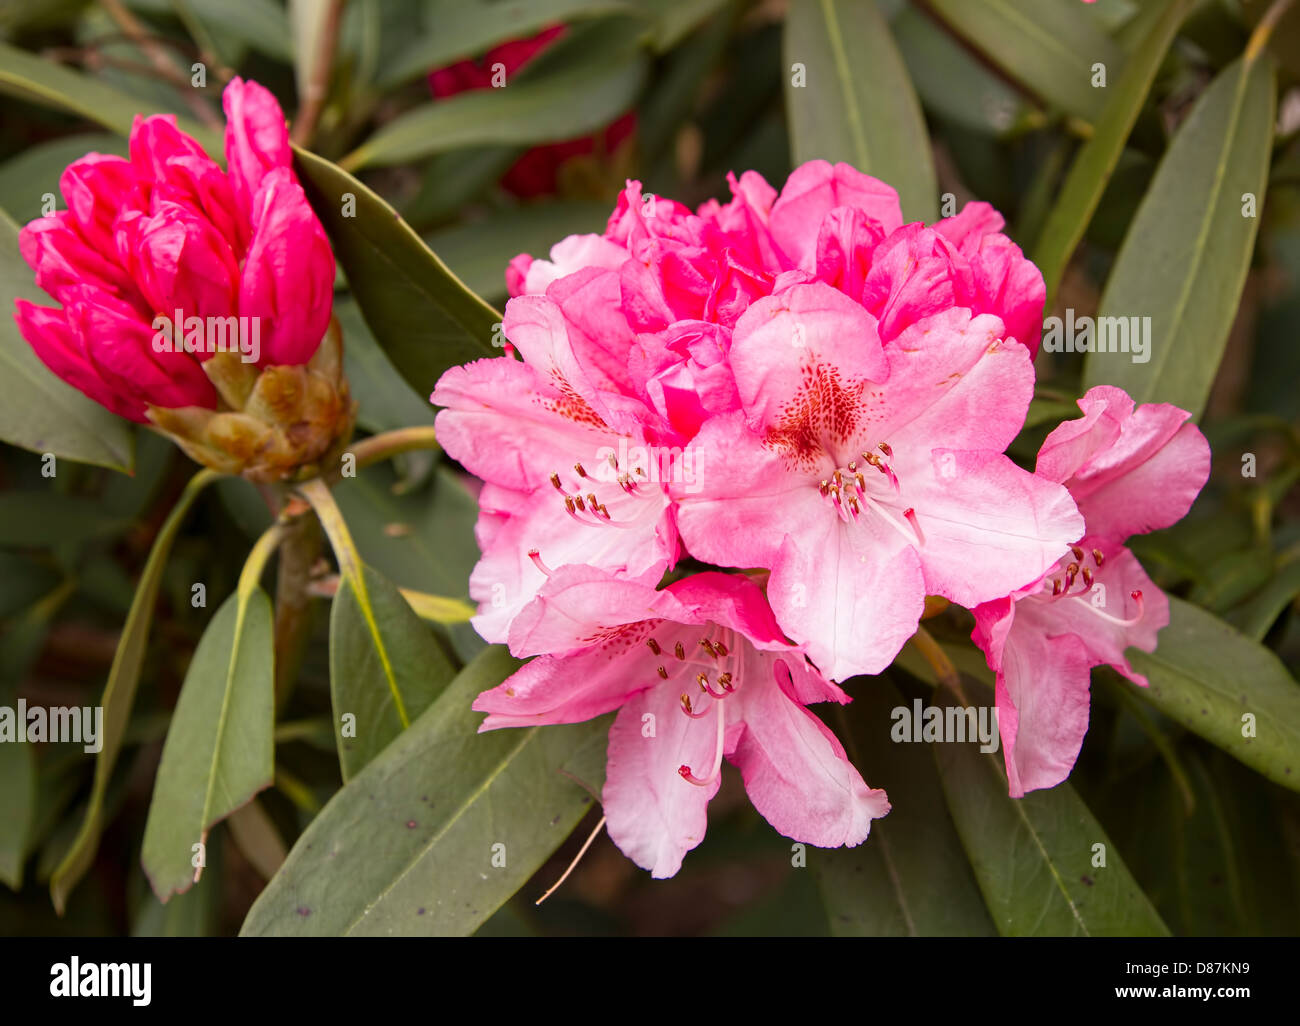 Close up image of pink rhododendron flower Stock Photo